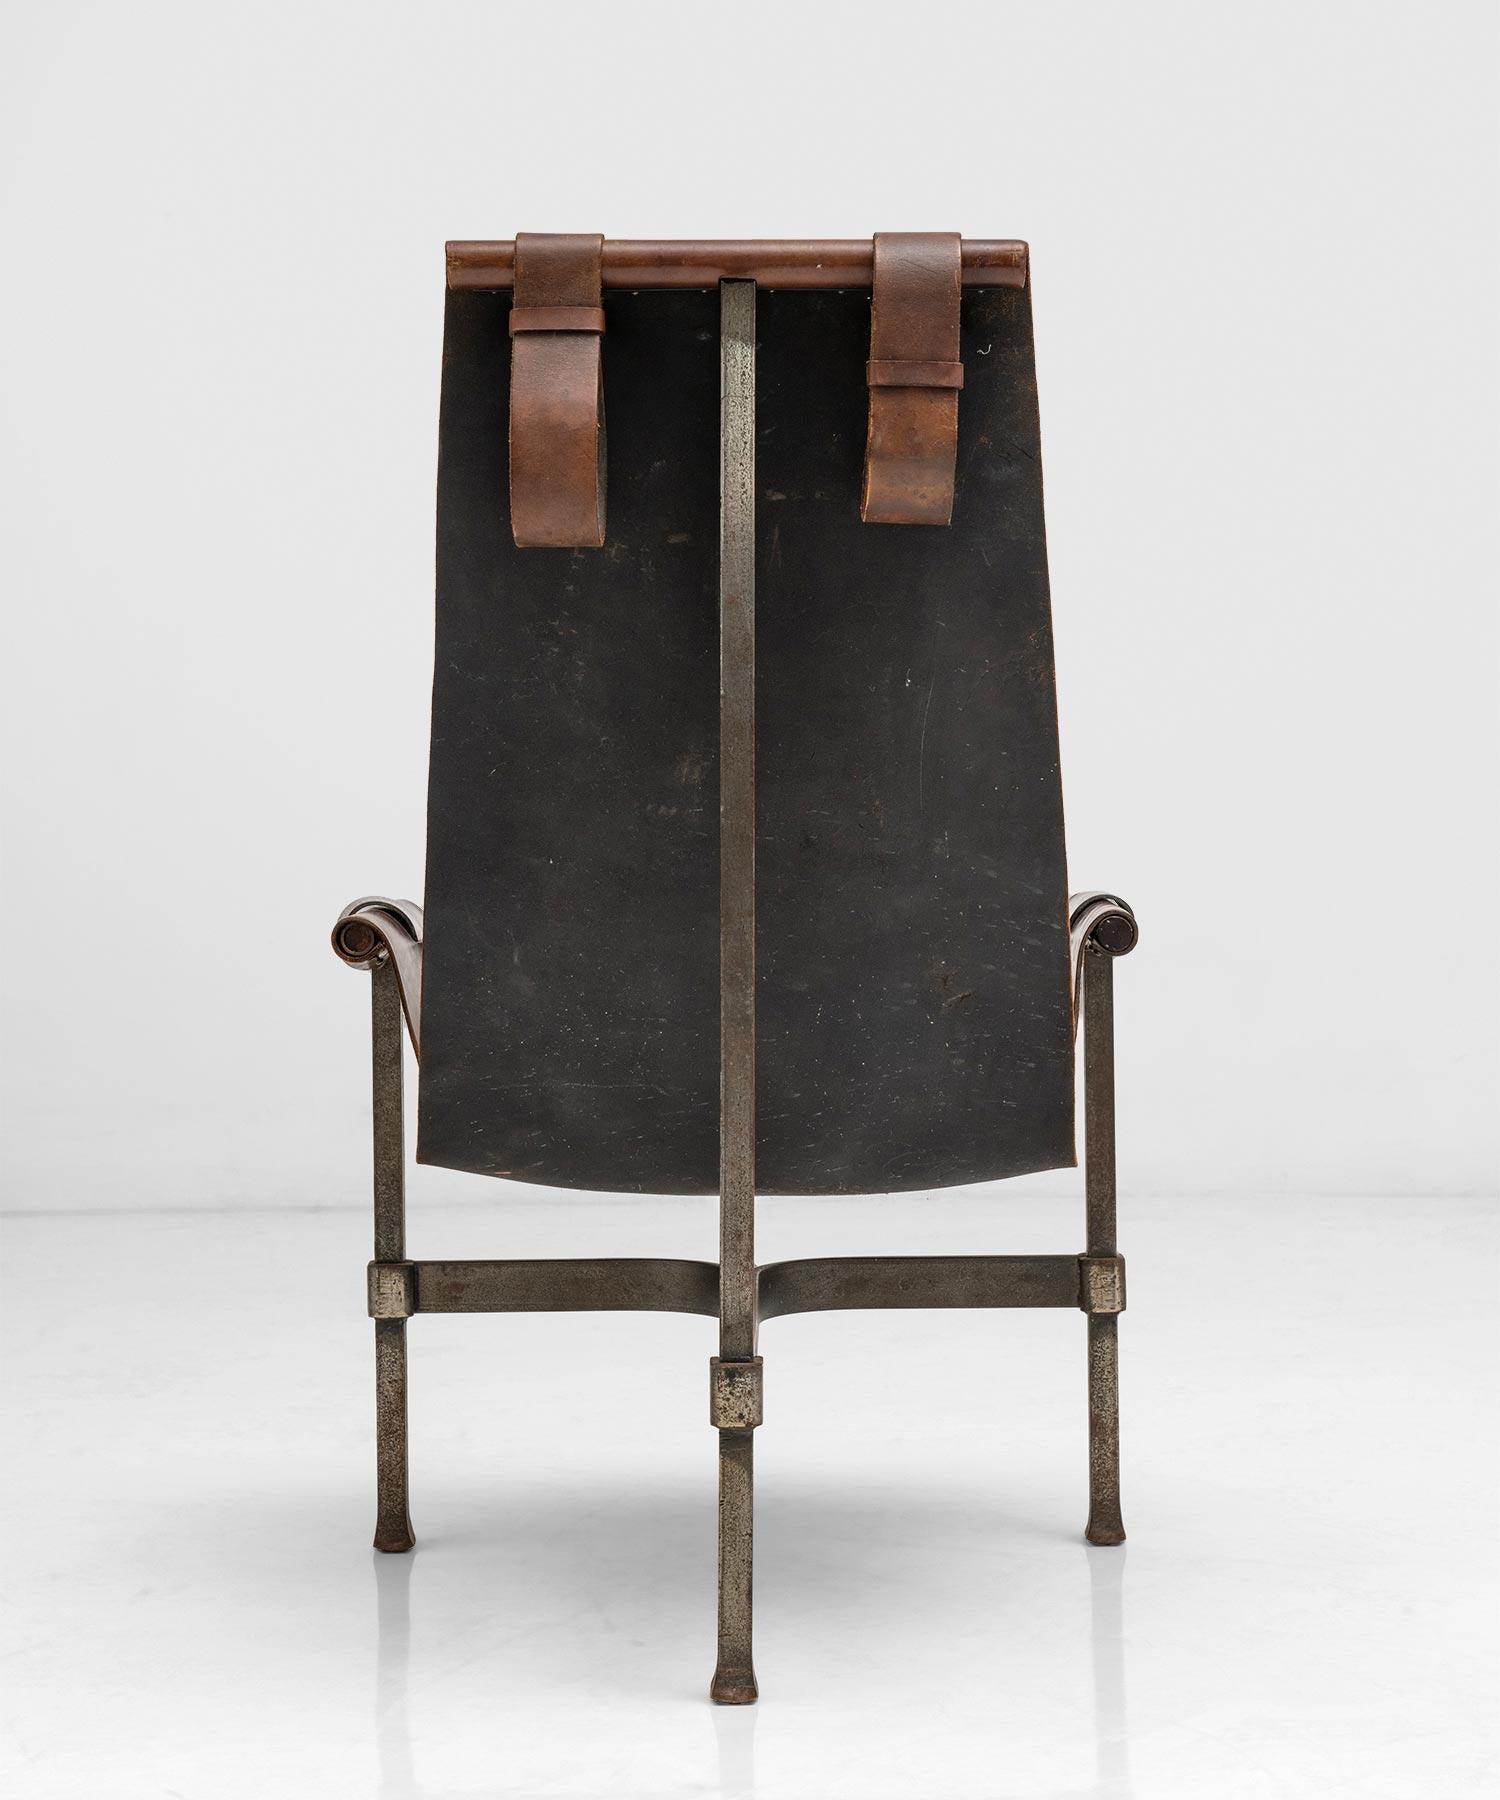 20th Century Steel & Leather Sling Chairs, Spain, Circa 1960